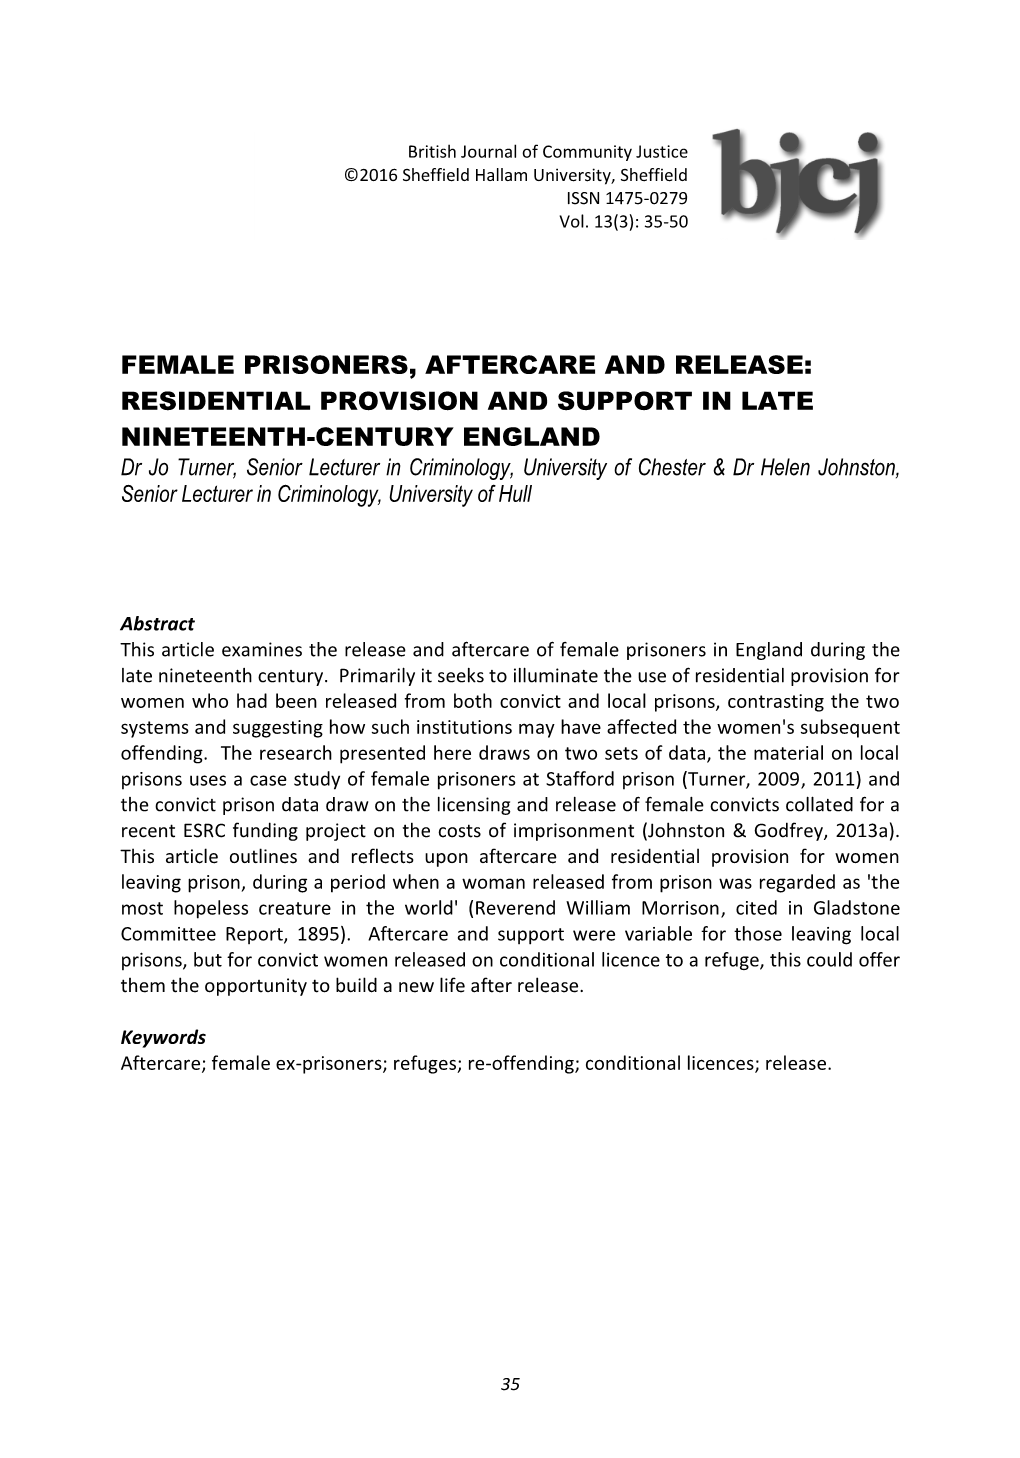 Female Prisoners, Aftercare and Release: Residential